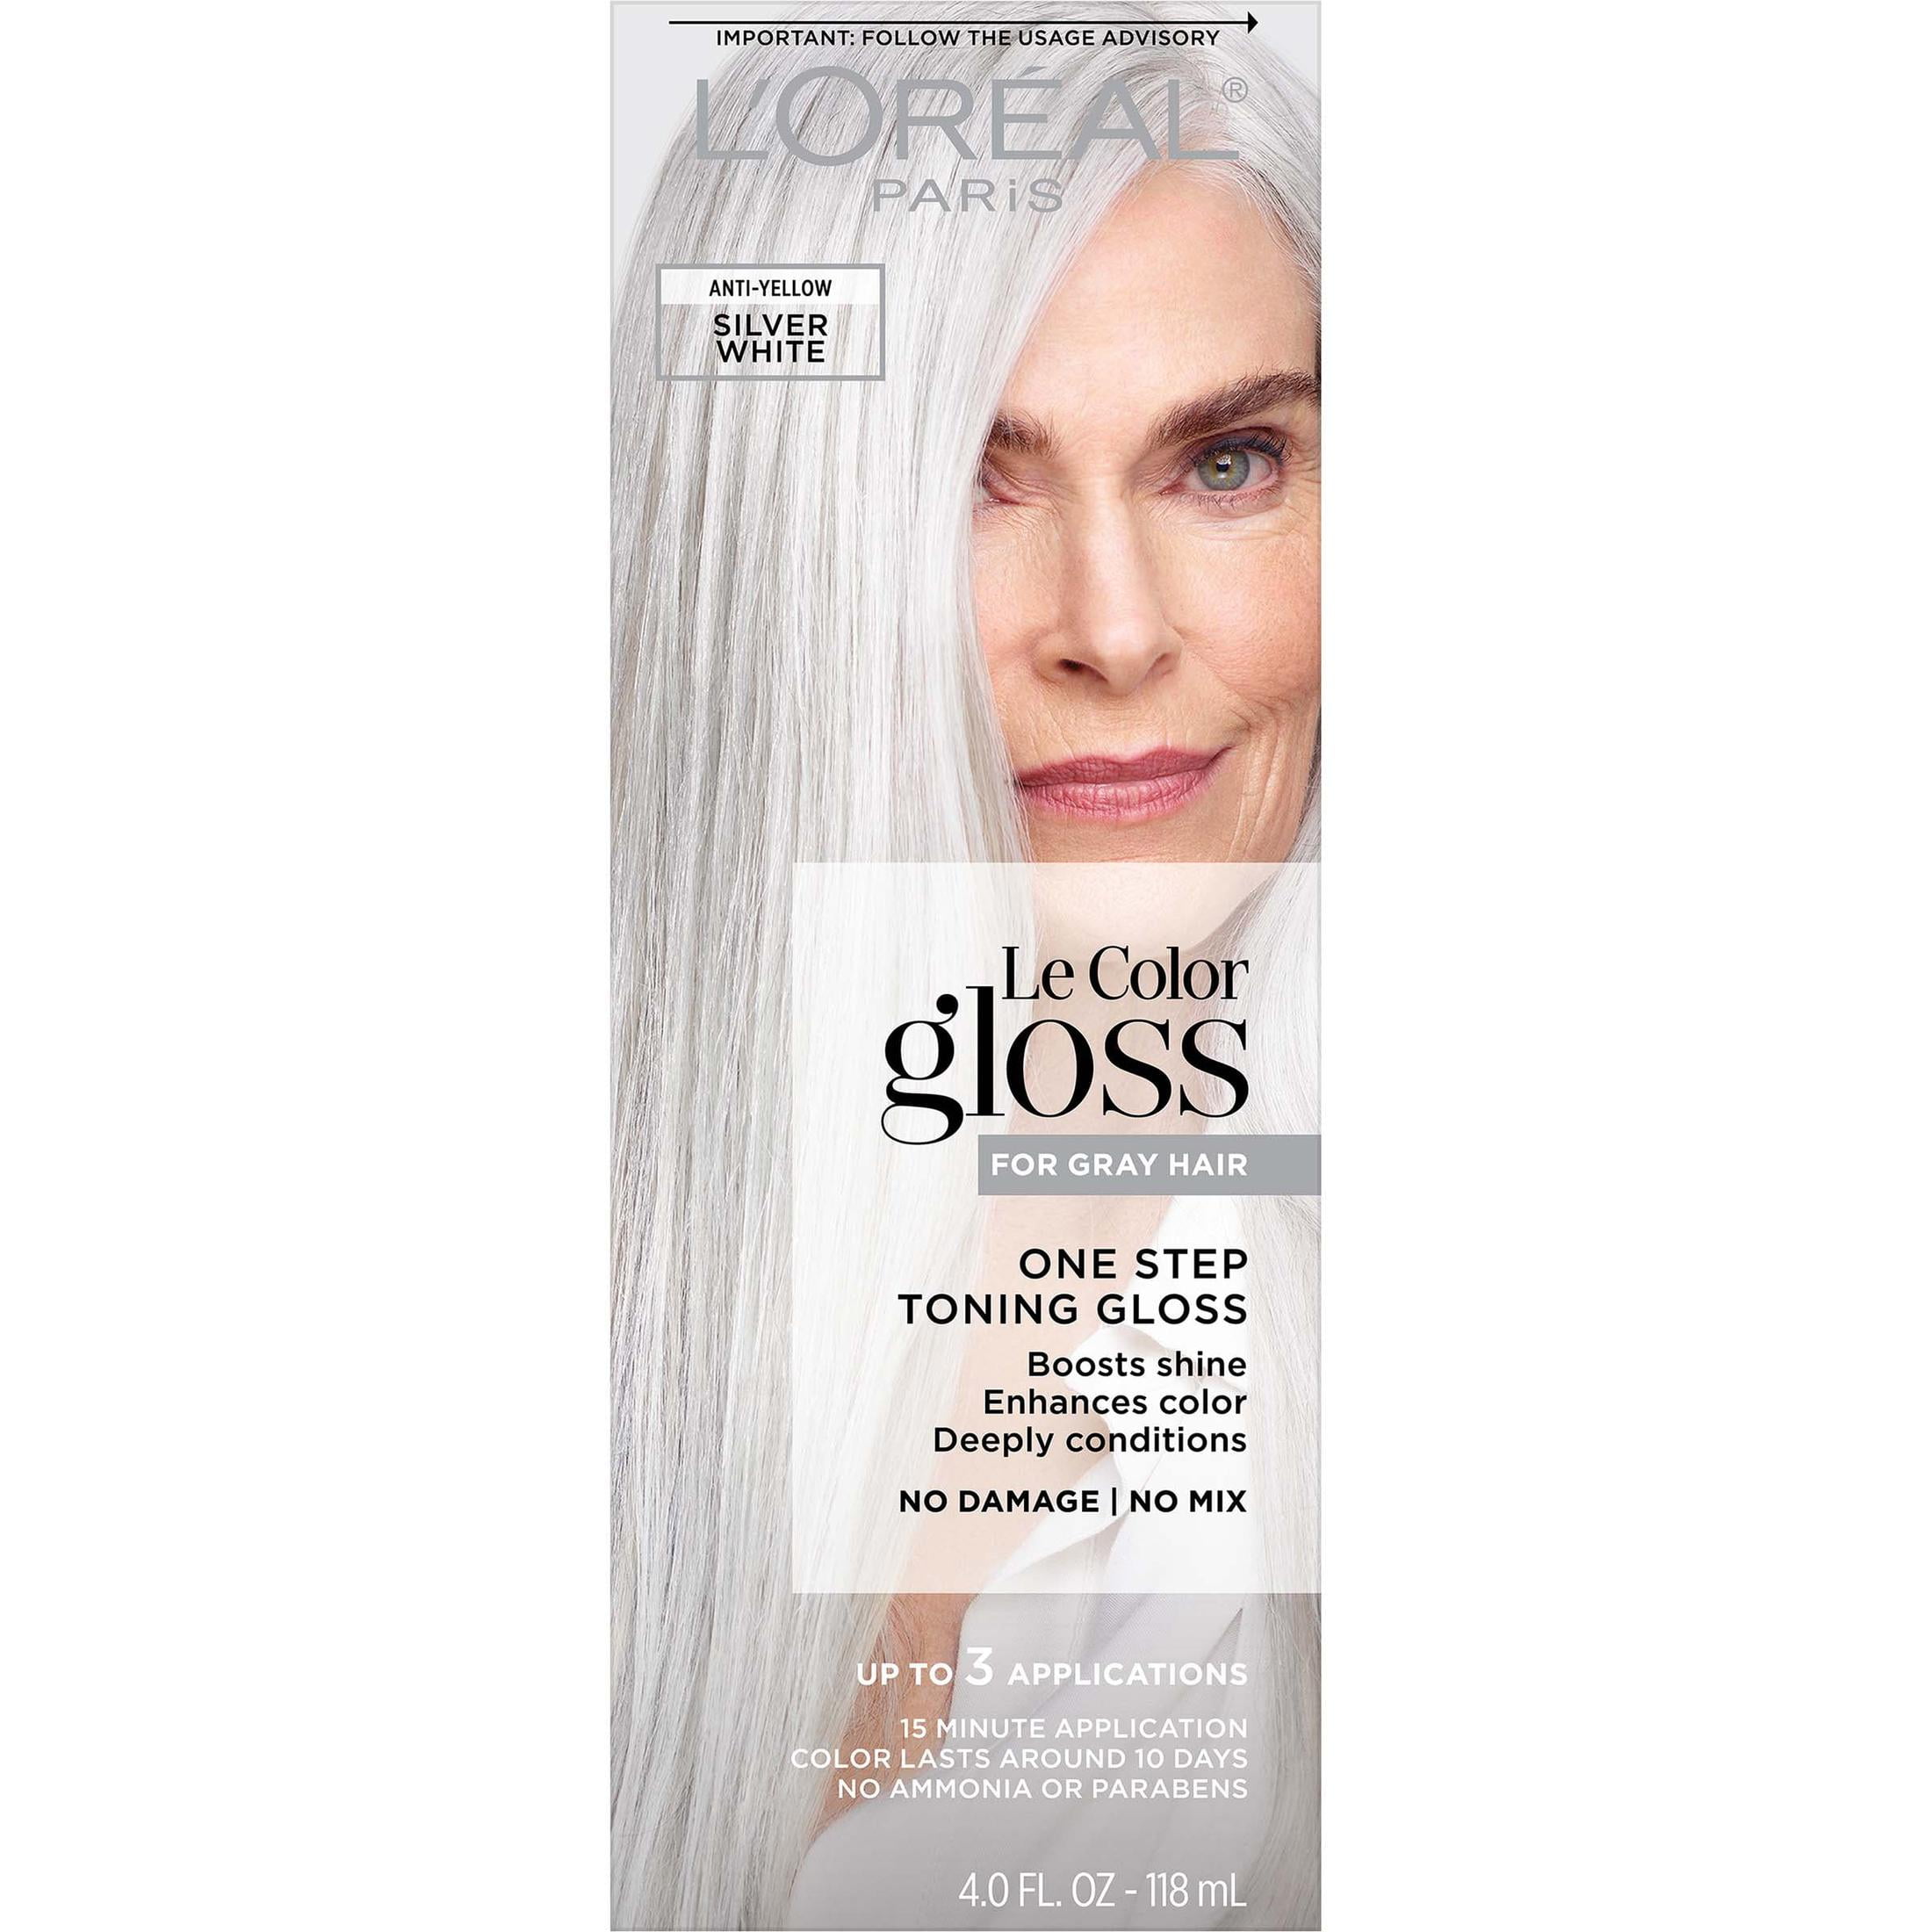 L'Oreal Paris Le Color Gloss with Water Cetearyl Alcohol, Silver White, 4  fl oz 